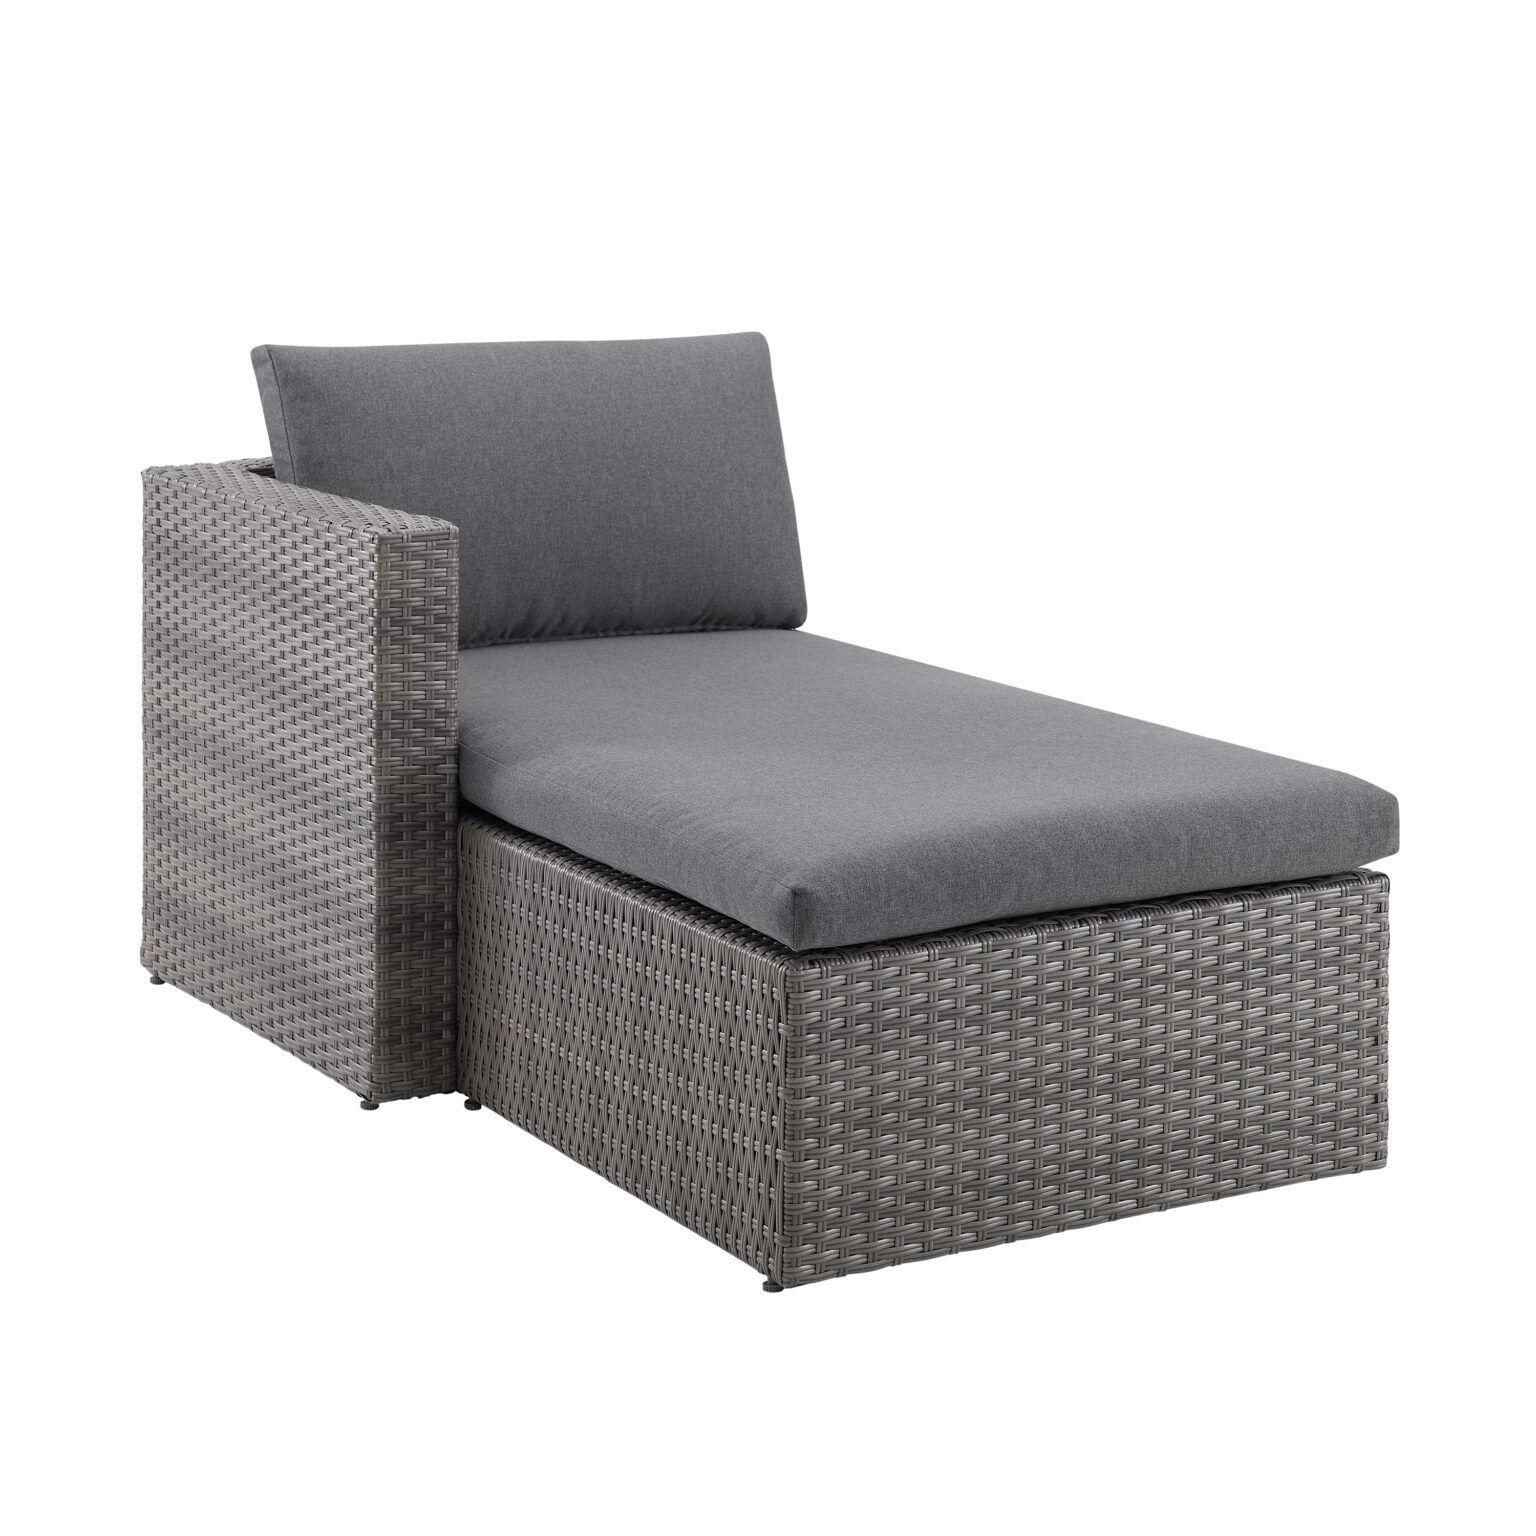 3 Piece Patio Furniture Sets, Weaving Rattan Outdoor Sectional Sofa In 3 Piece Outdoor Table And Loveseat Sets (View 10 of 15)